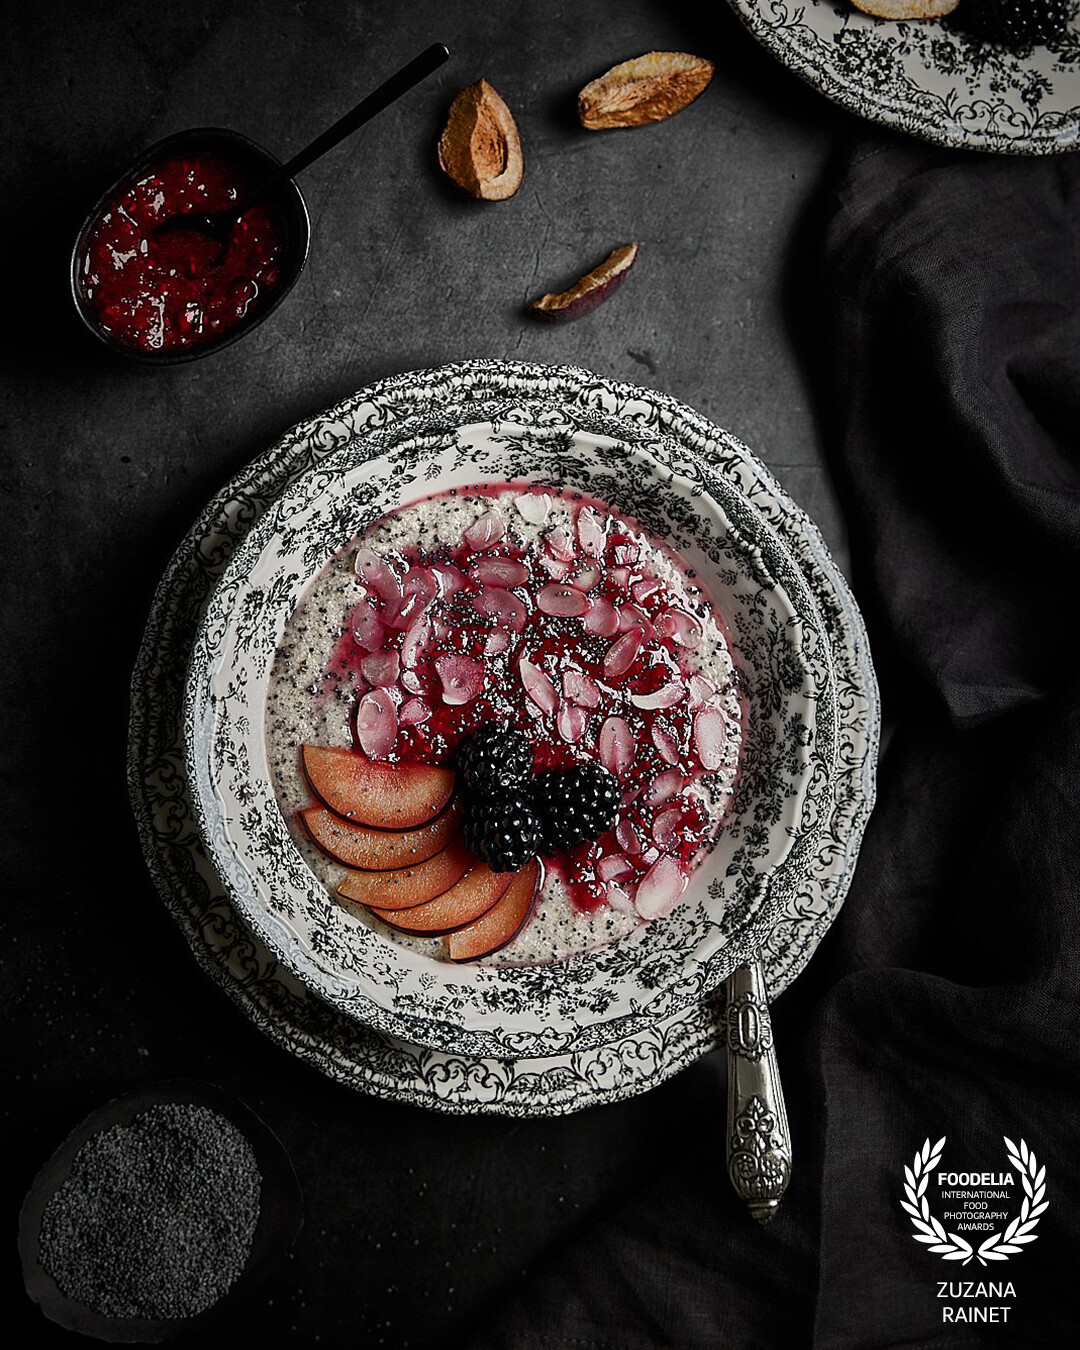 I shot this image for my client Tigernut Planet who produces various products from tigernut plant, such as porridge.  I focused on porridge styling so it looks beautiful and yummy. Image was shot in dark and moody style with studio flash light.